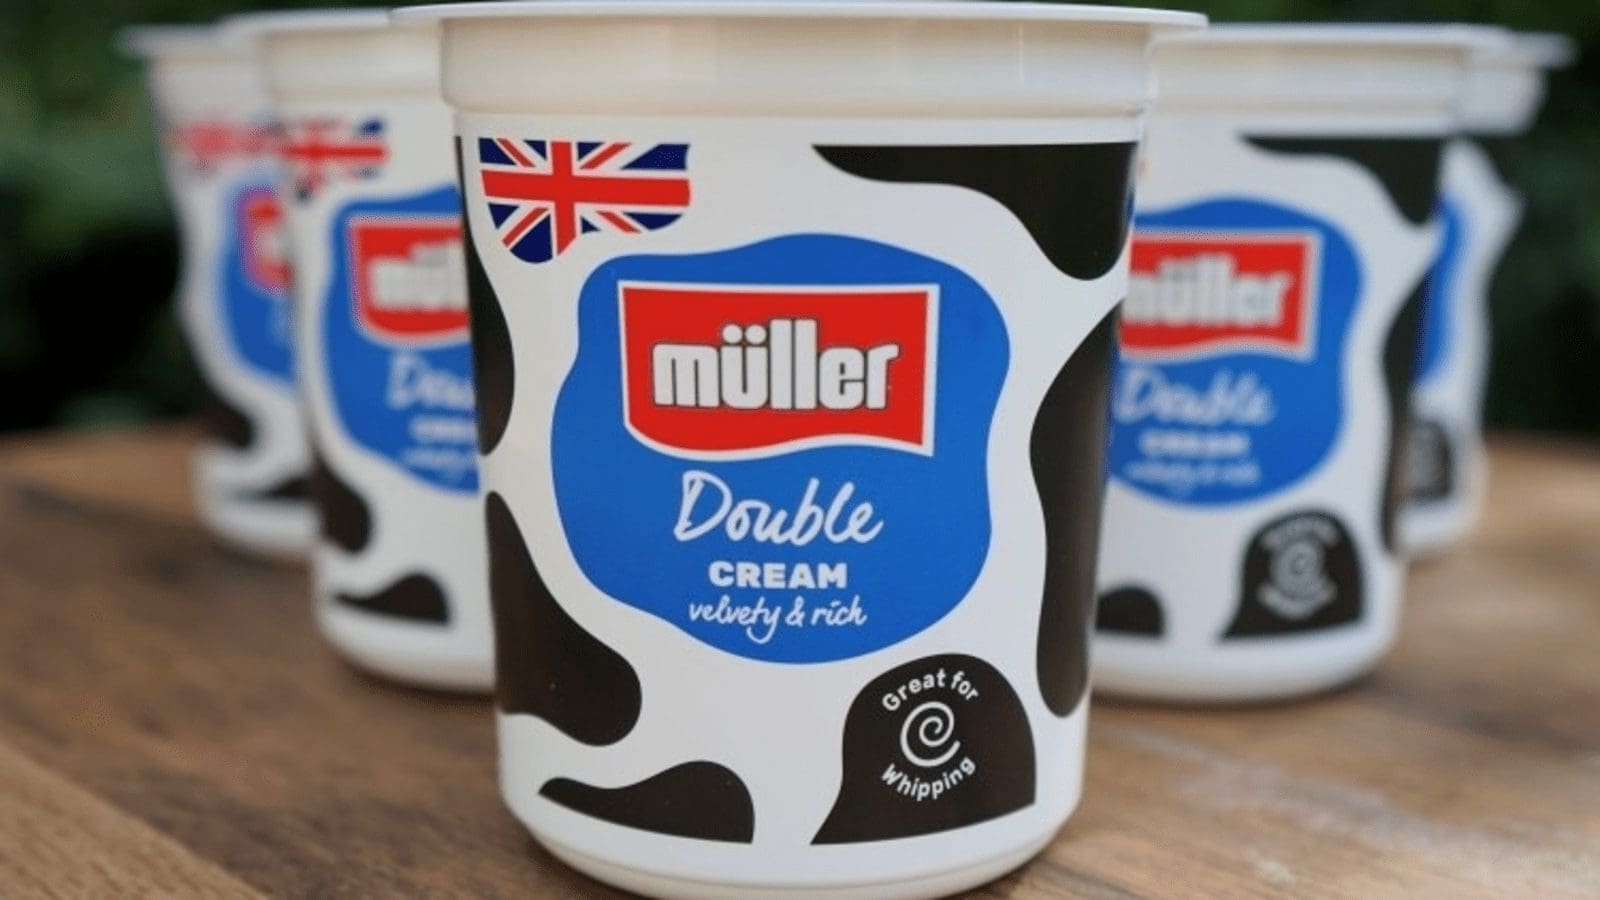 Müller Milk & Ingredients turns to recycled plastics to remove virgin plastics annually